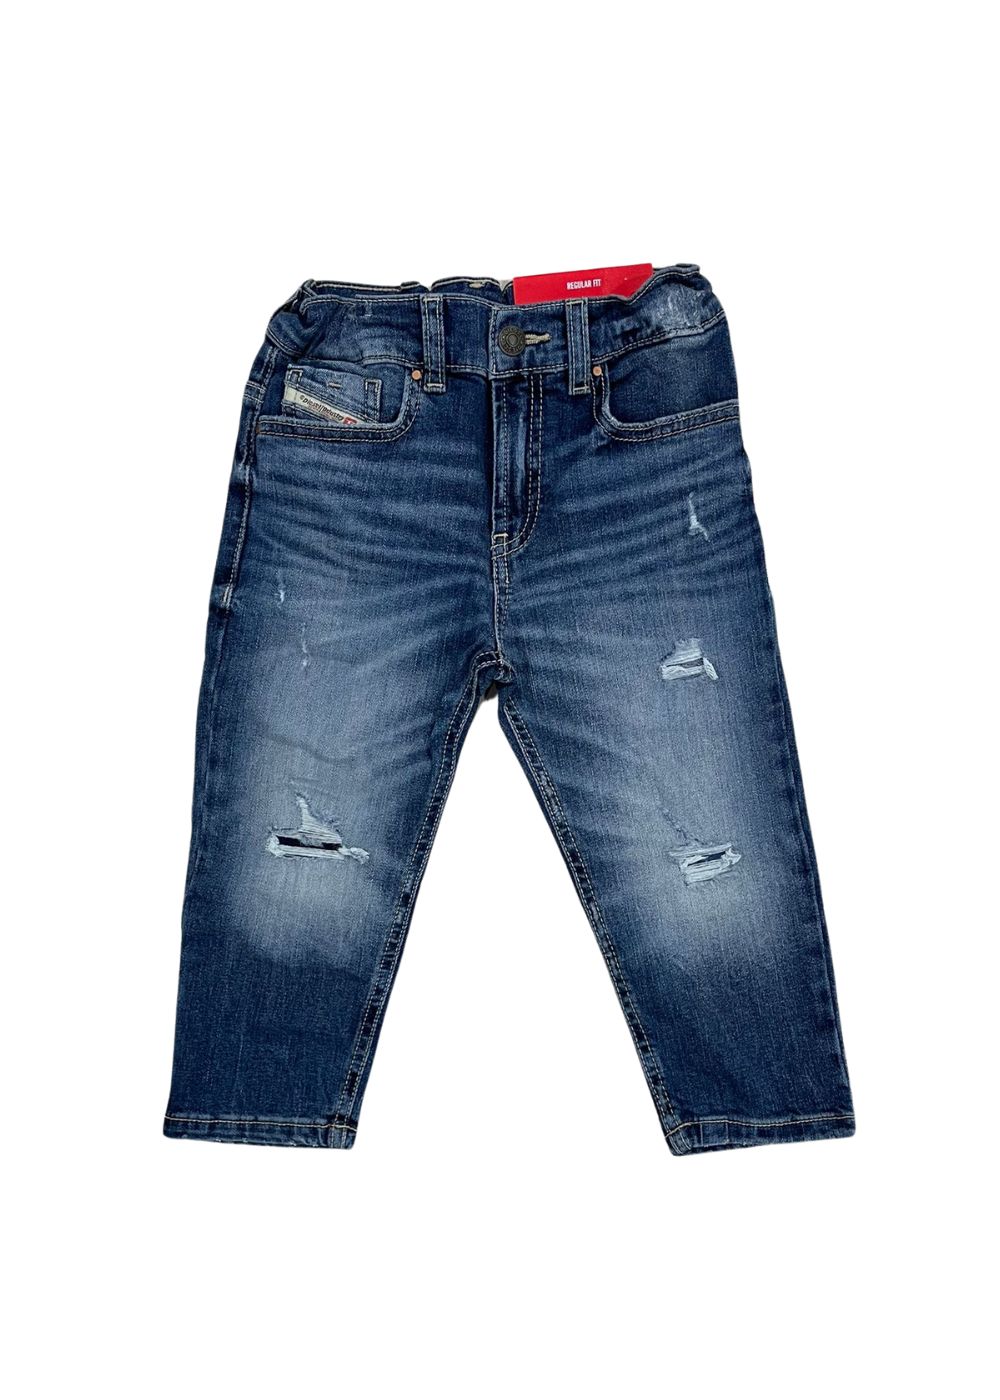 Featured image for “Diesel Jeans Bambino”